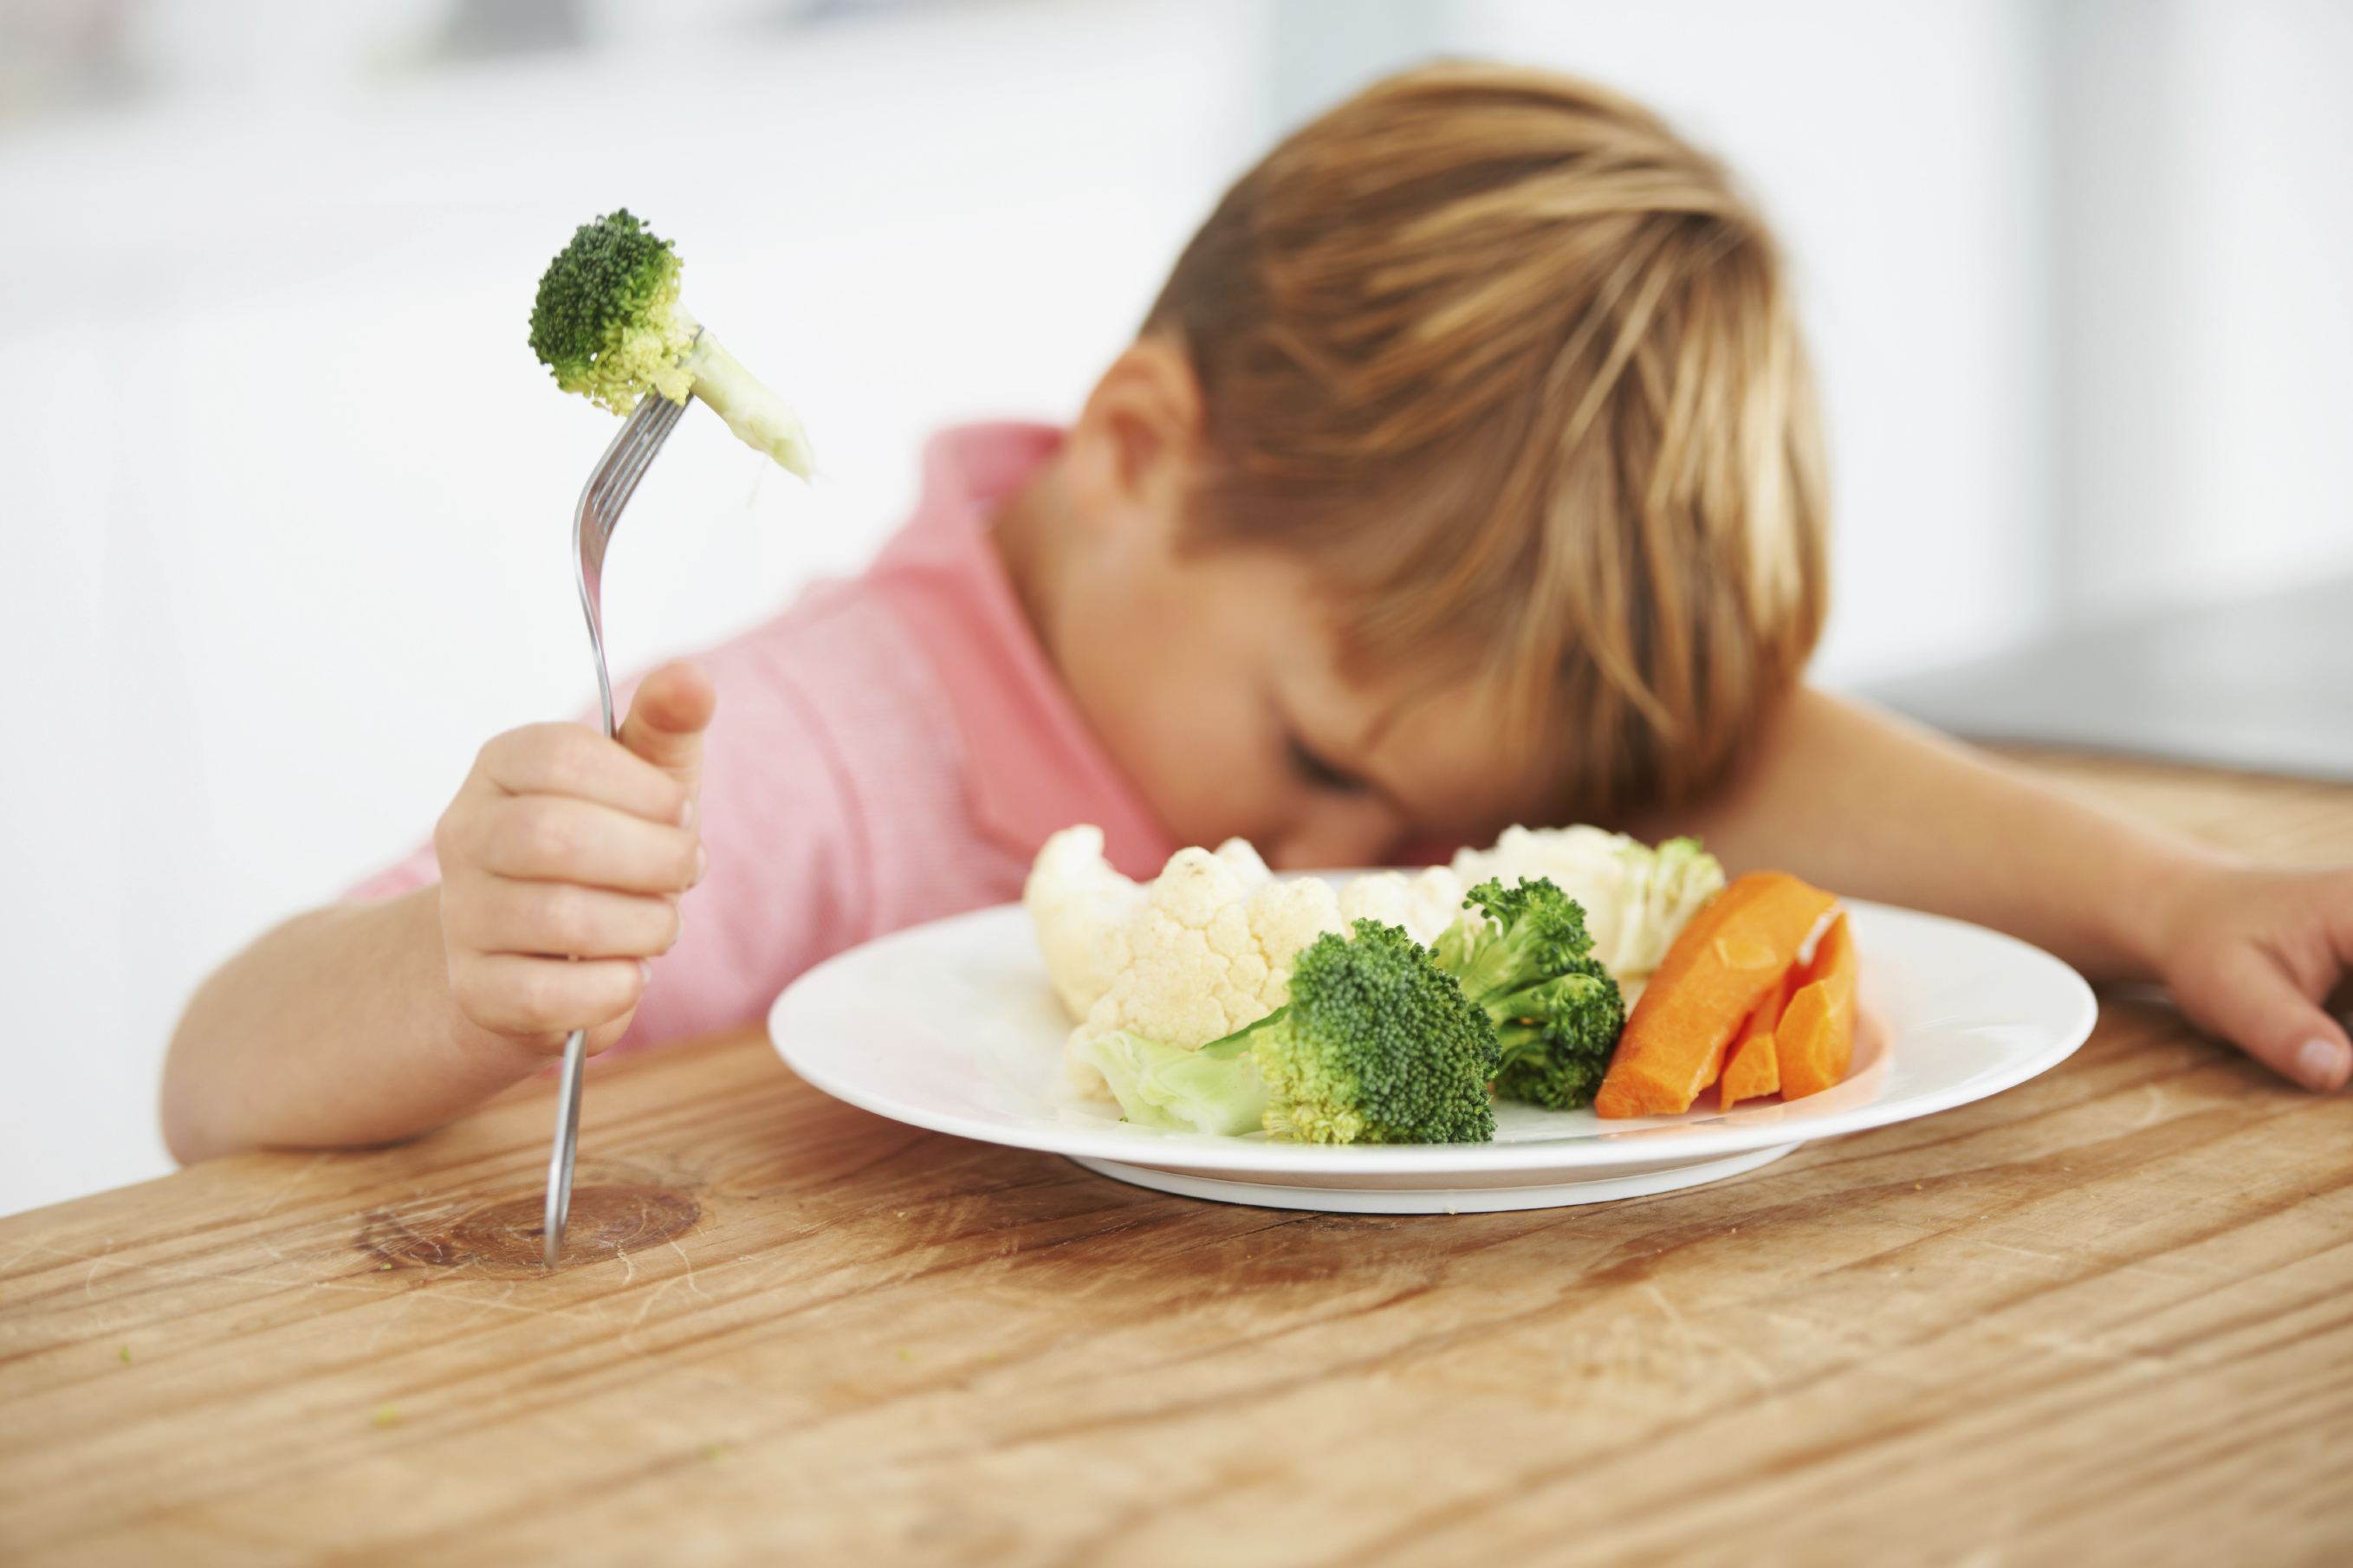 How to Teach Your Kids Healthy Eating Habits